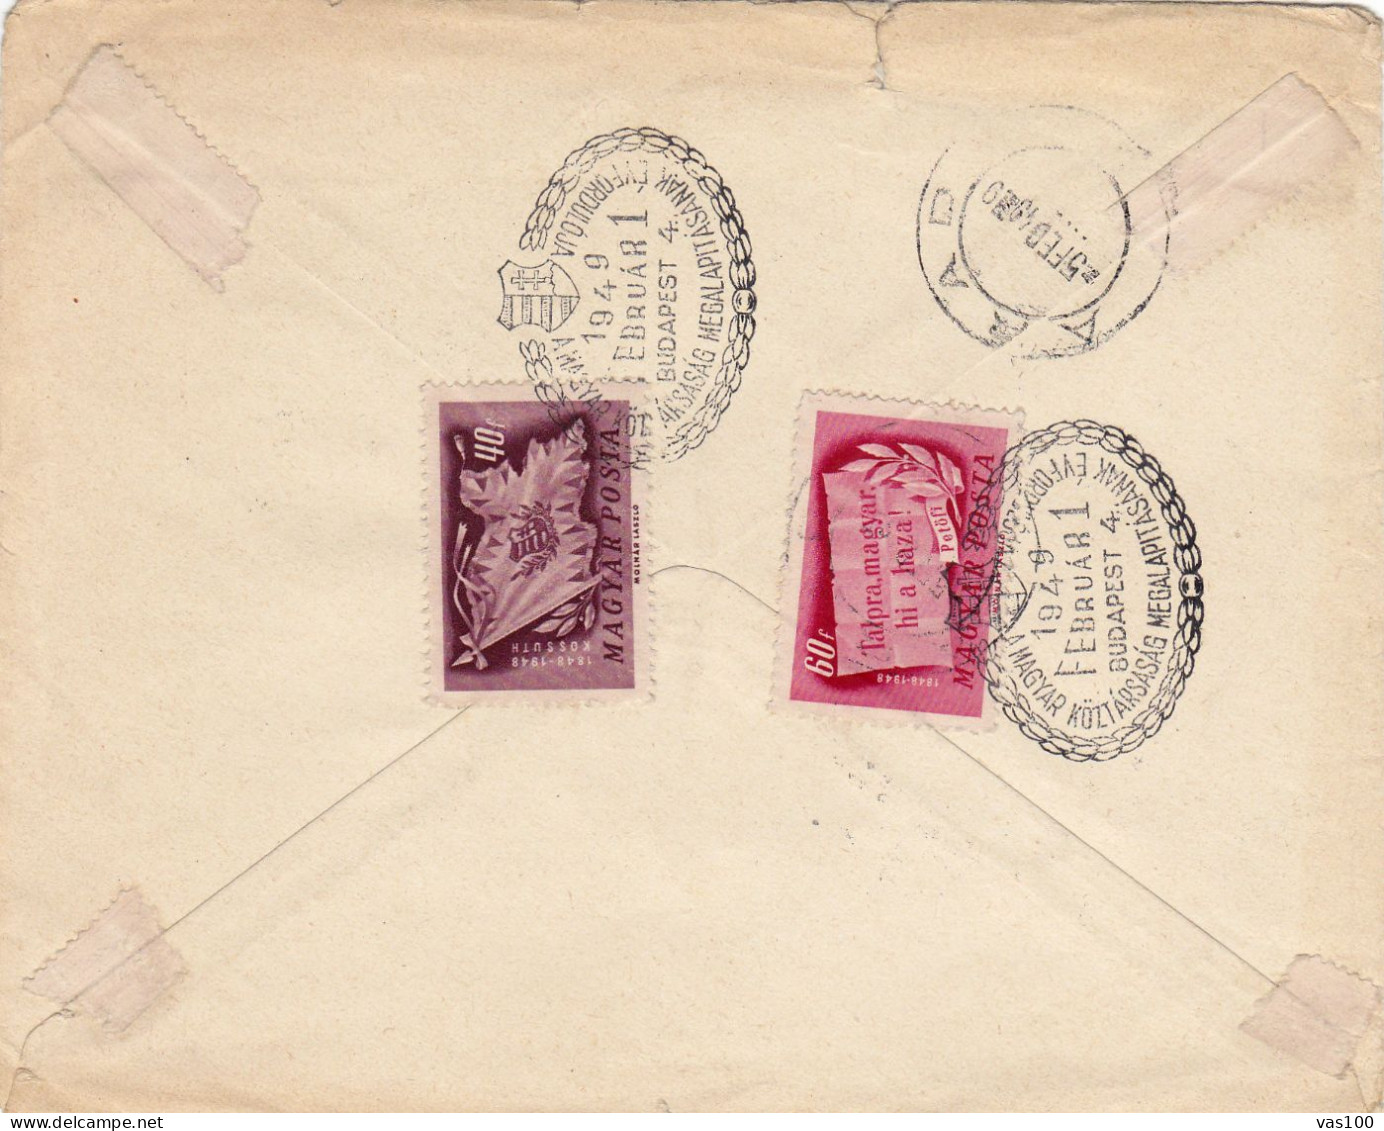 HISTORICAL DOCUMENTS  REGISTERED   COVERS  NICE FRANKING  1949  HUNGARY - Covers & Documents